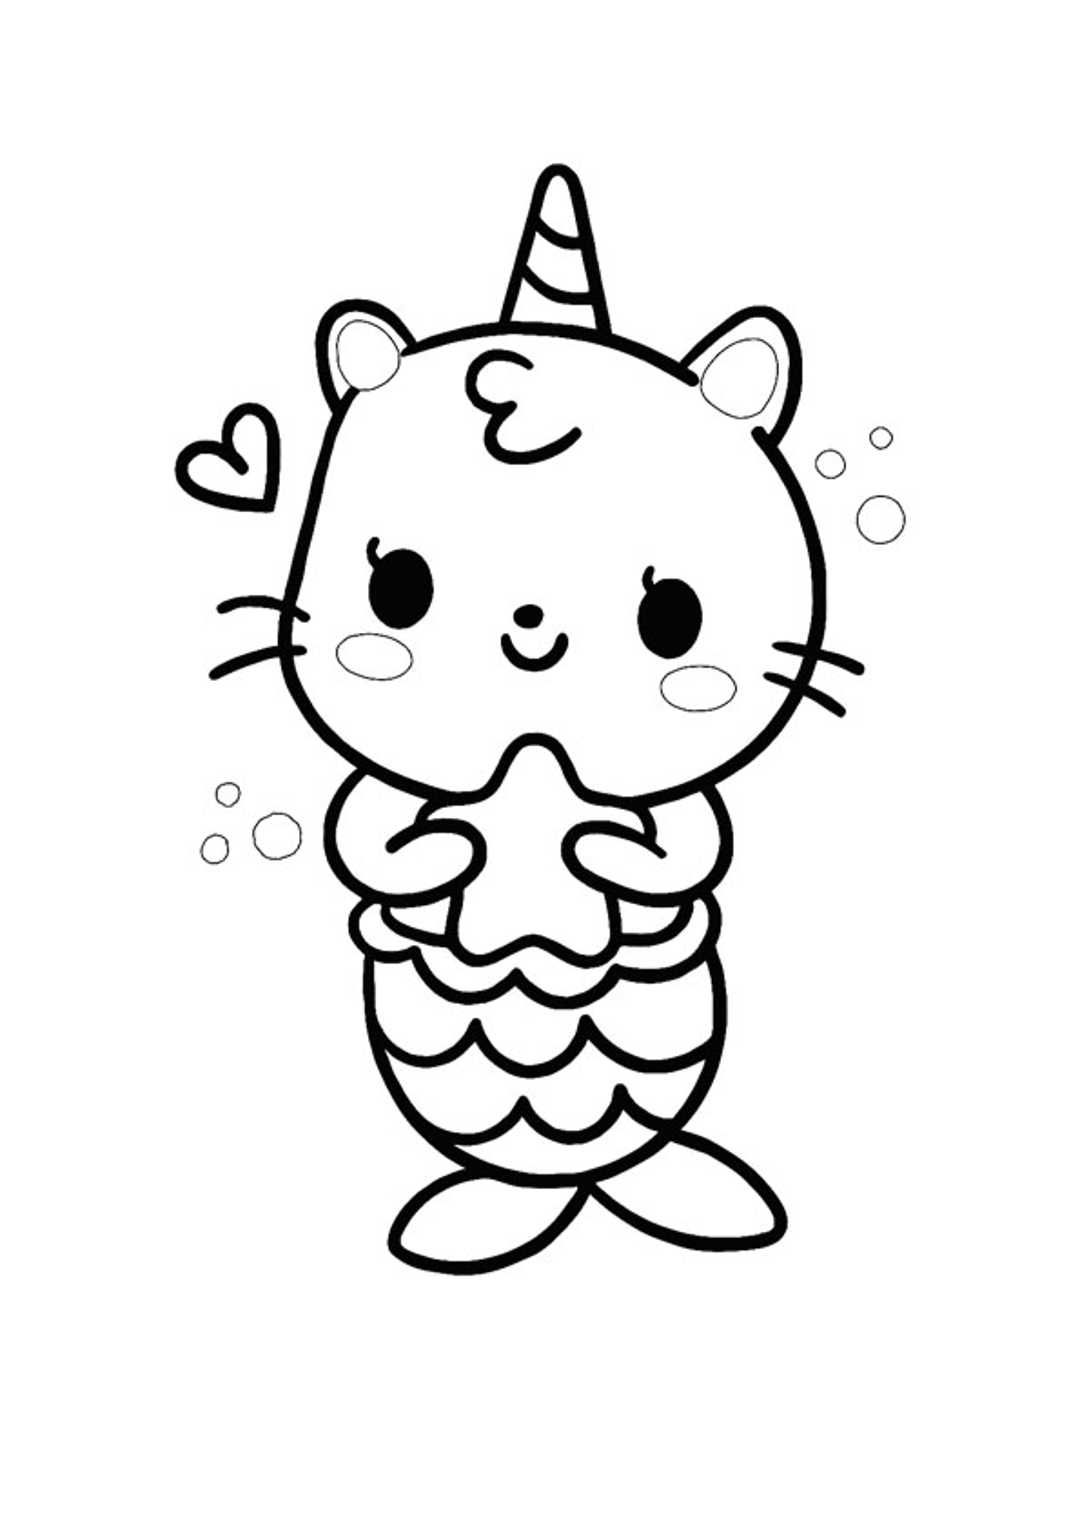 Unicorn Cat Mermaid Coloring Page - Free Printable Coloring Pages